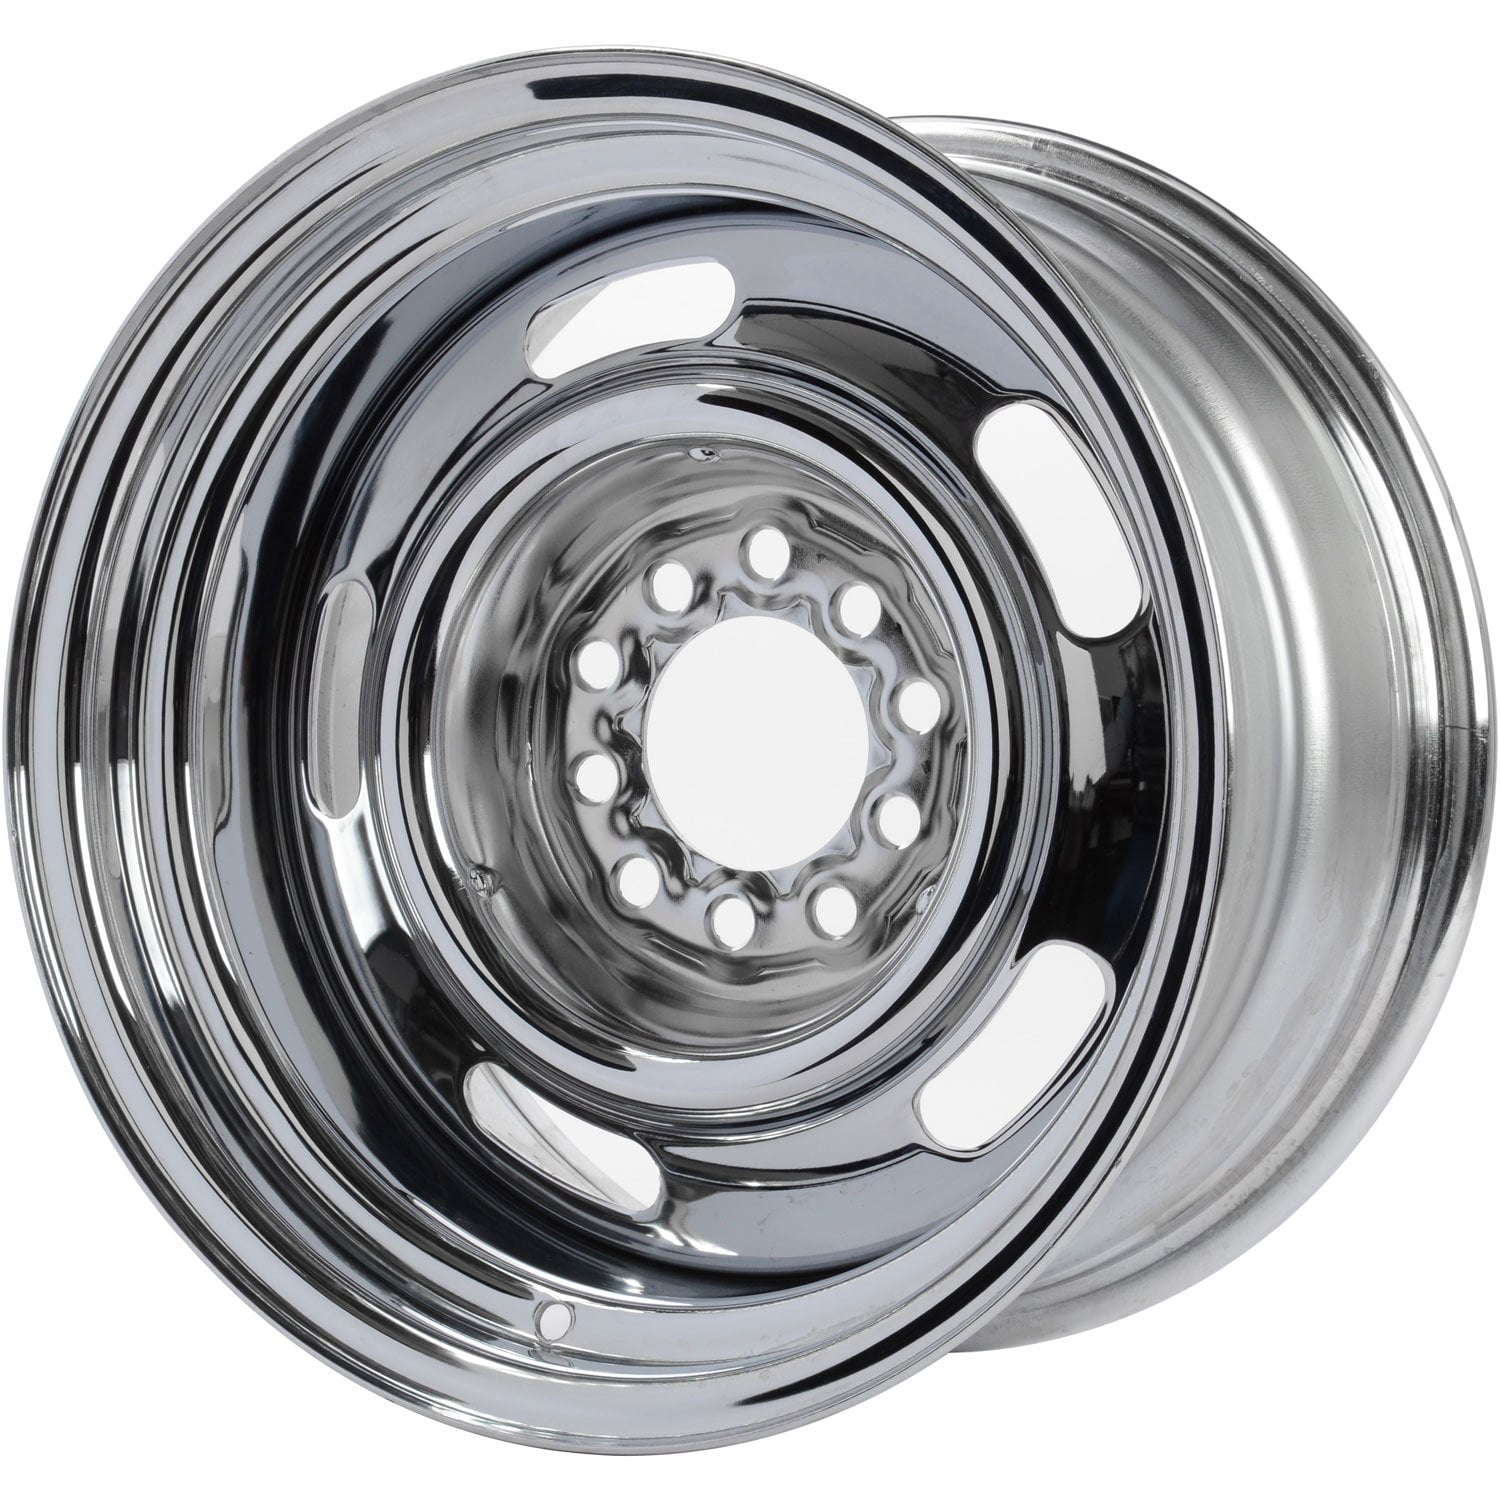 JEGS Performance Products 681230 Rally Wheel Diameter x Width 15 x 8